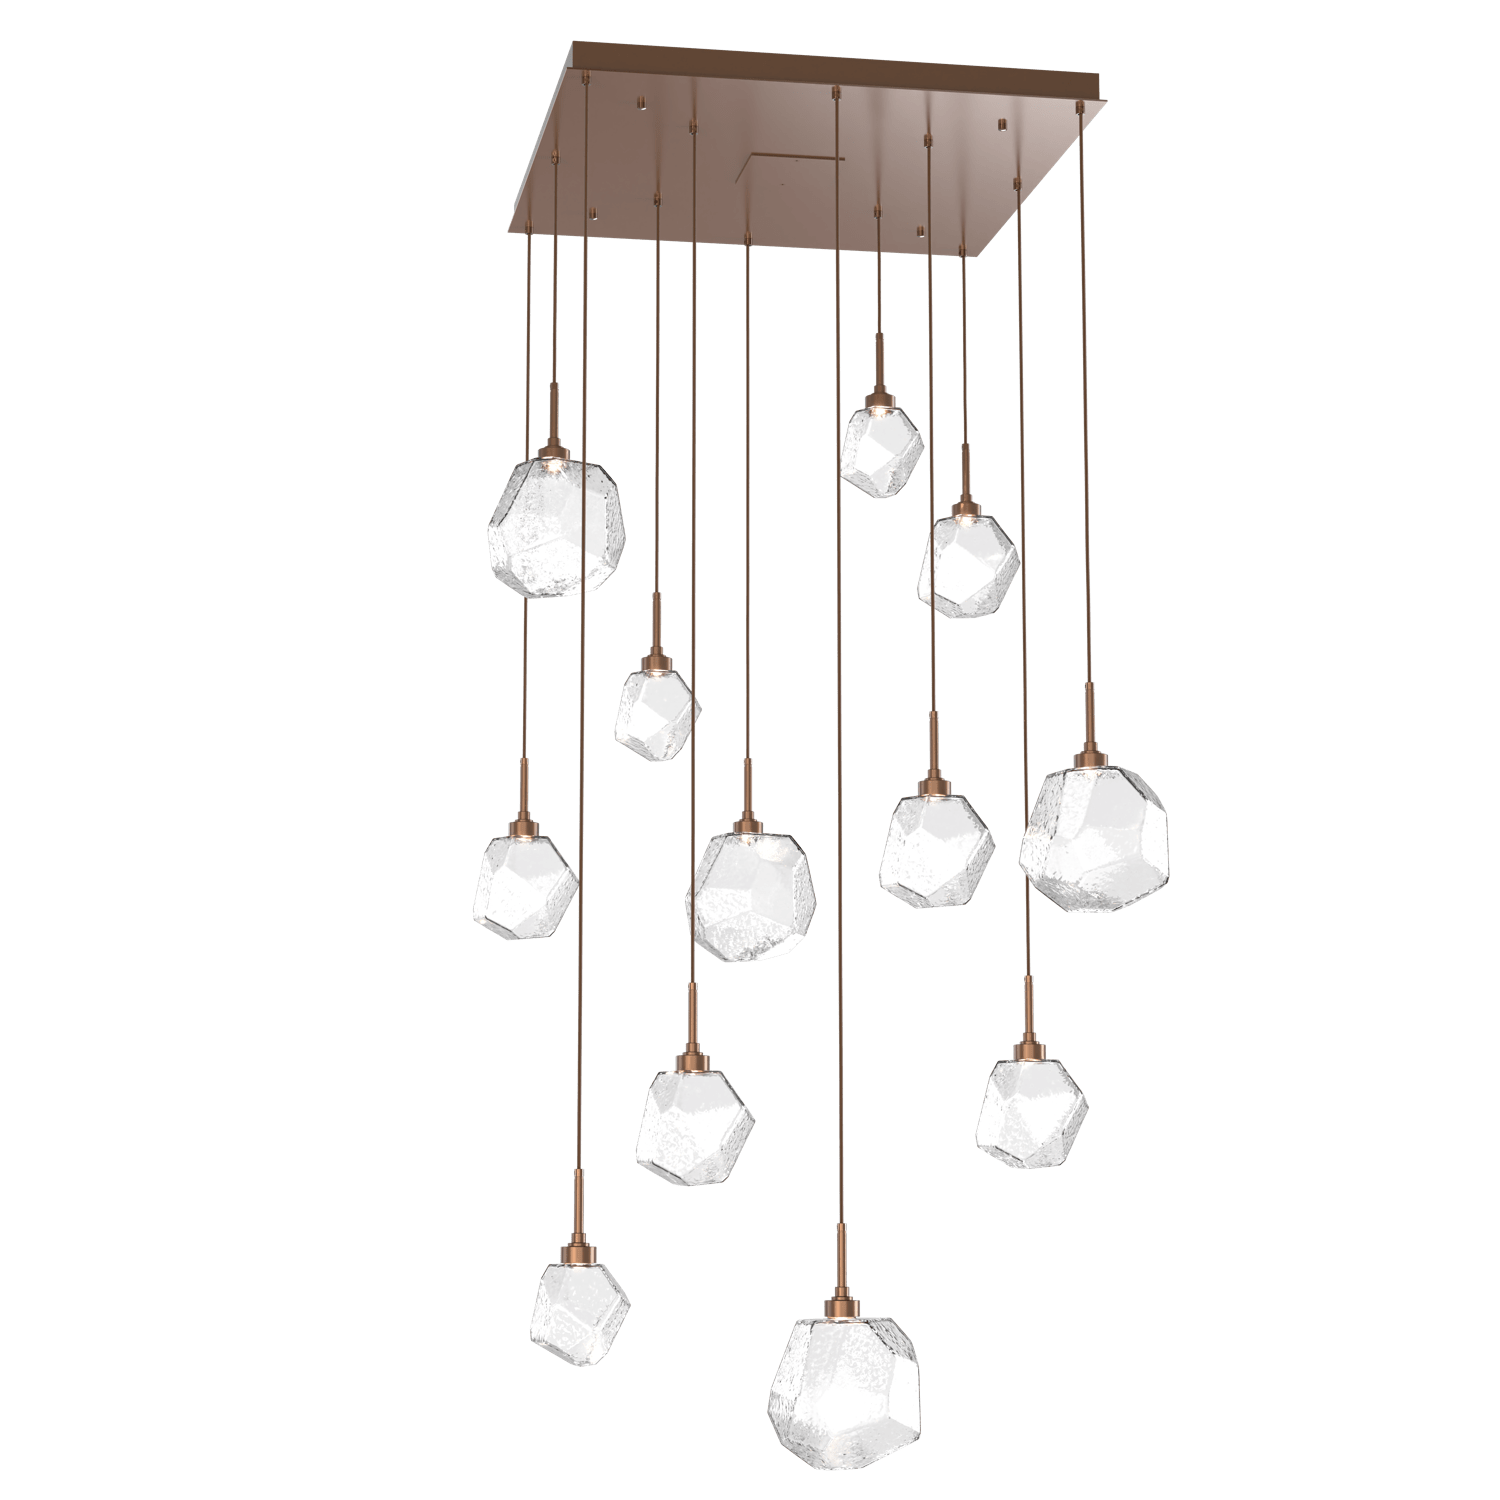 CHB0039-12-BB-C-Hammerton-Studio-Gem-12-light-square-pendant-chandelier-with-burnished-bronze-finish-and-clear-blown-glass-shades-and-LED-lamping